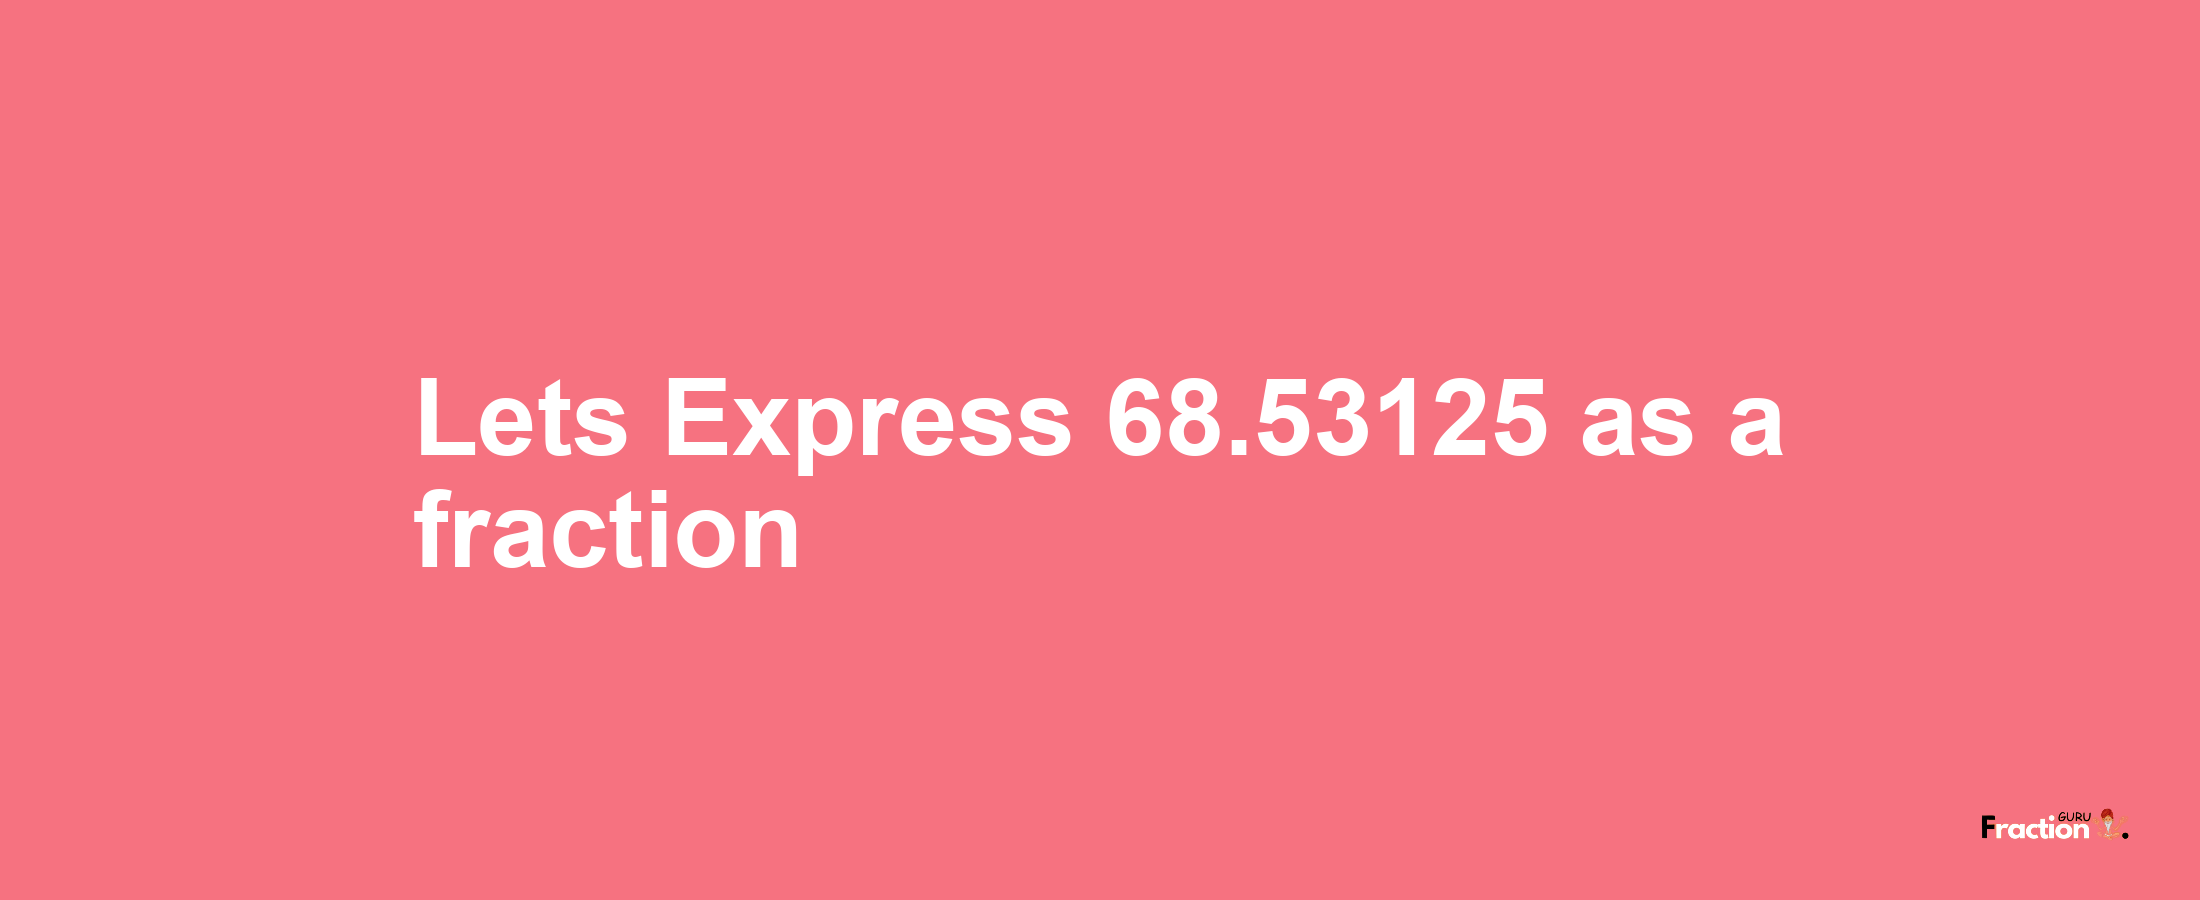 Lets Express 68.53125 as afraction